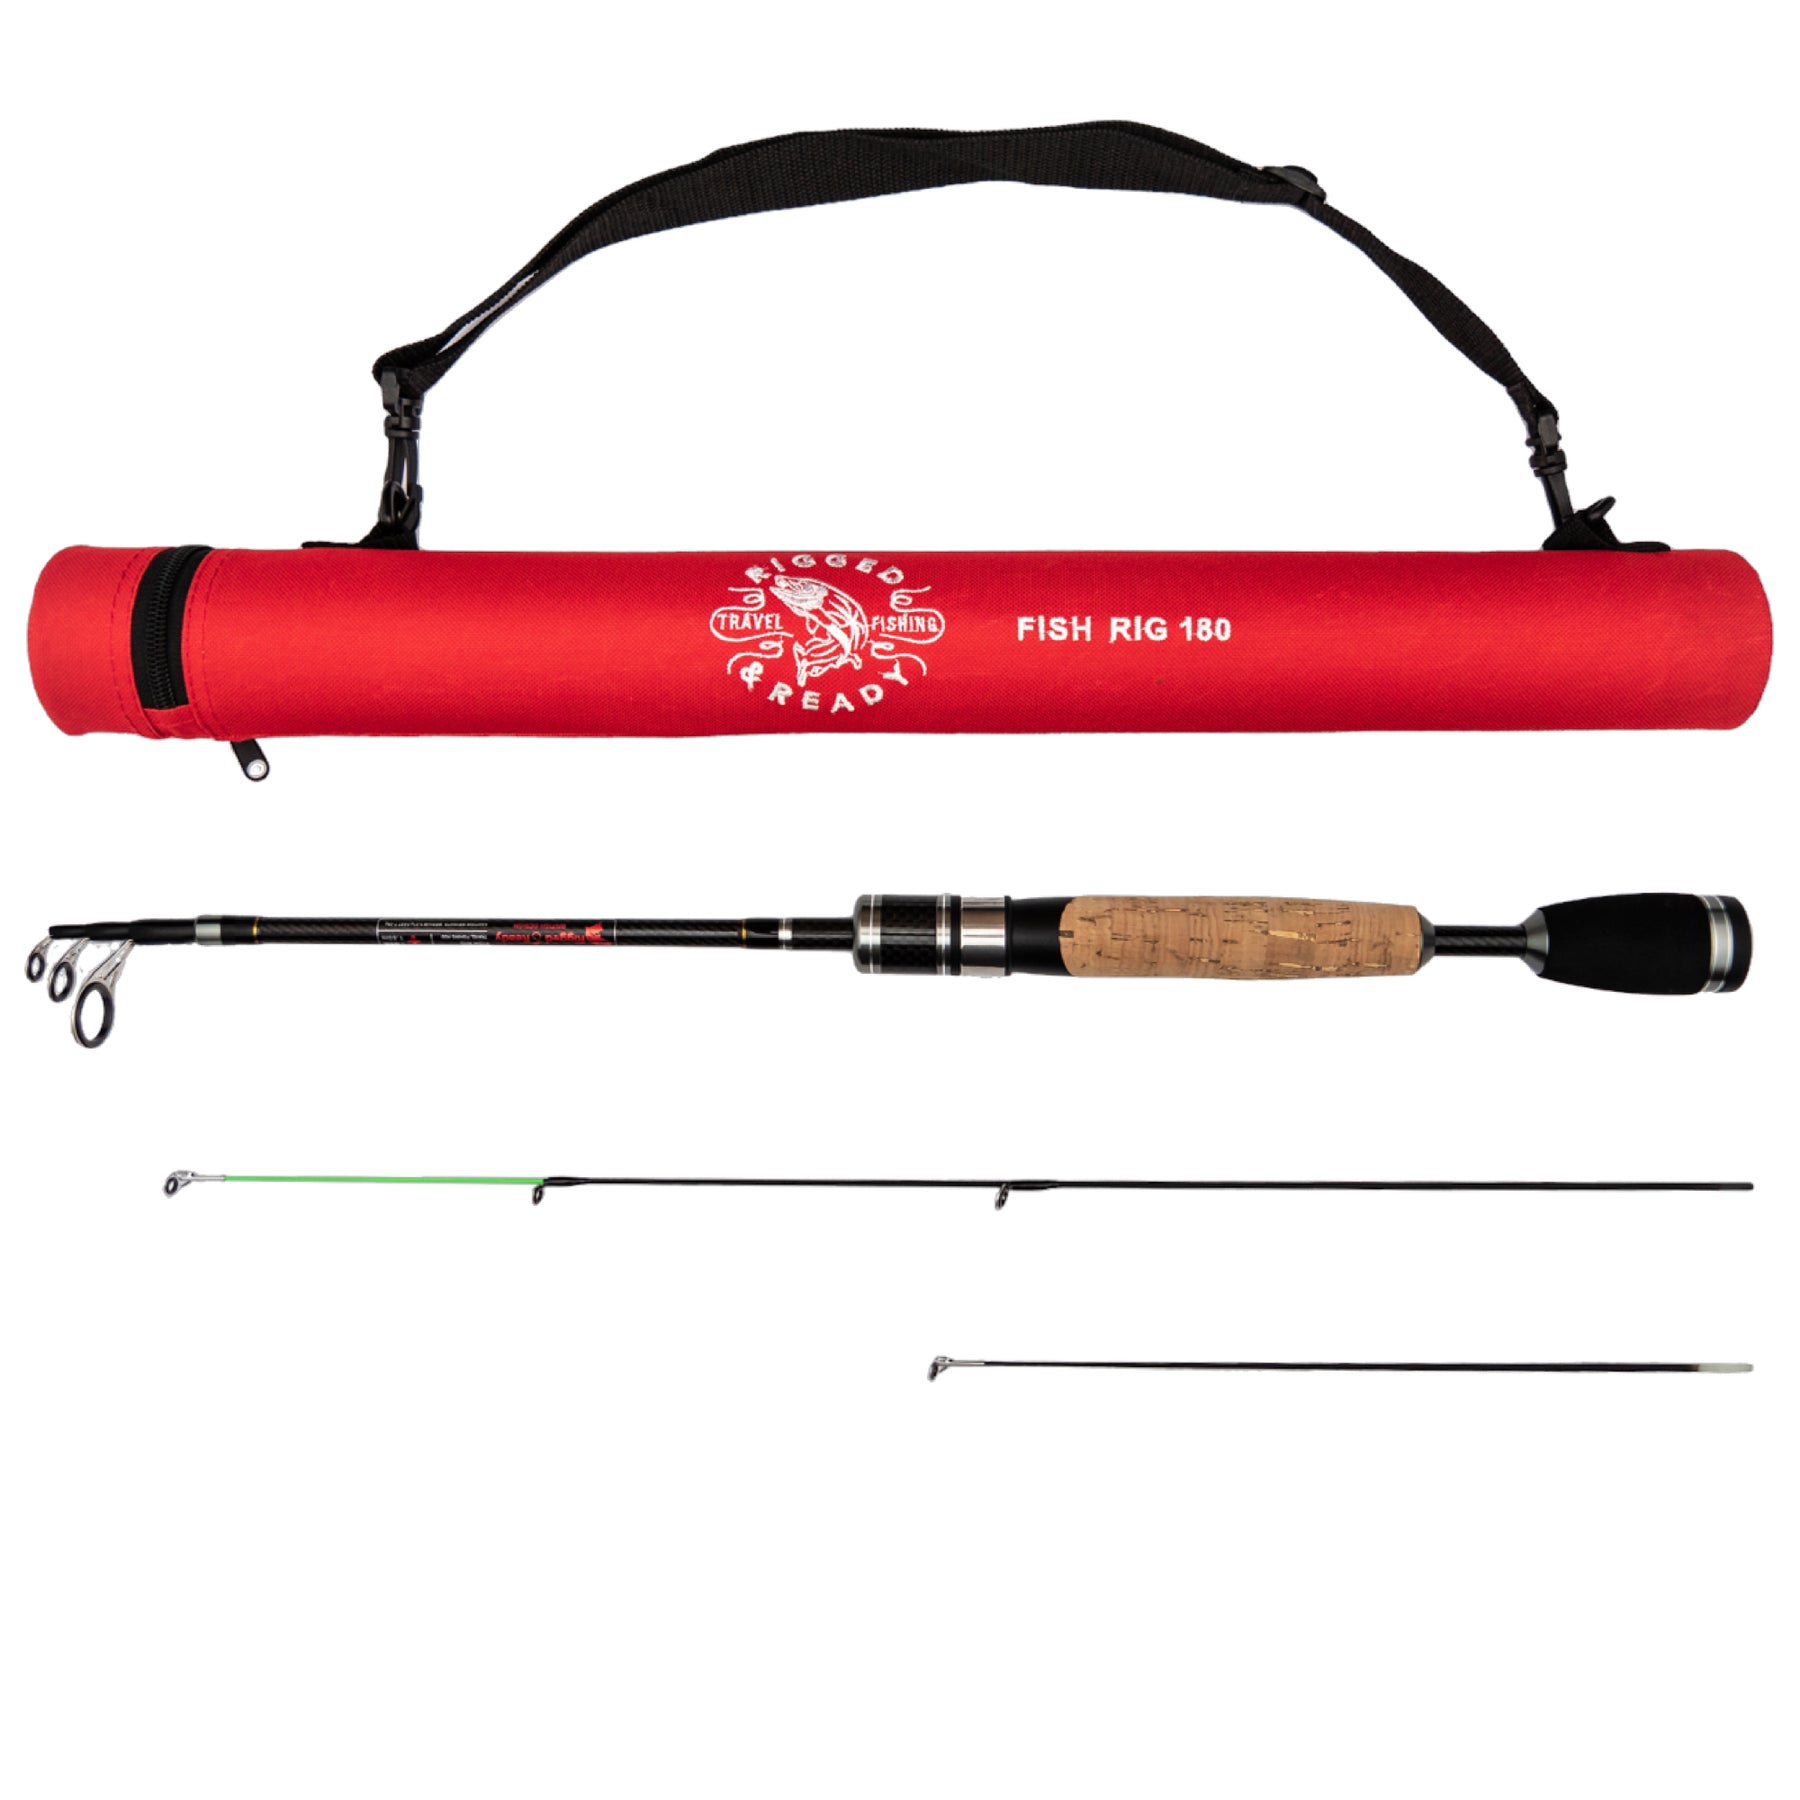 Telescopic fishing rod • Compare & see prices now »